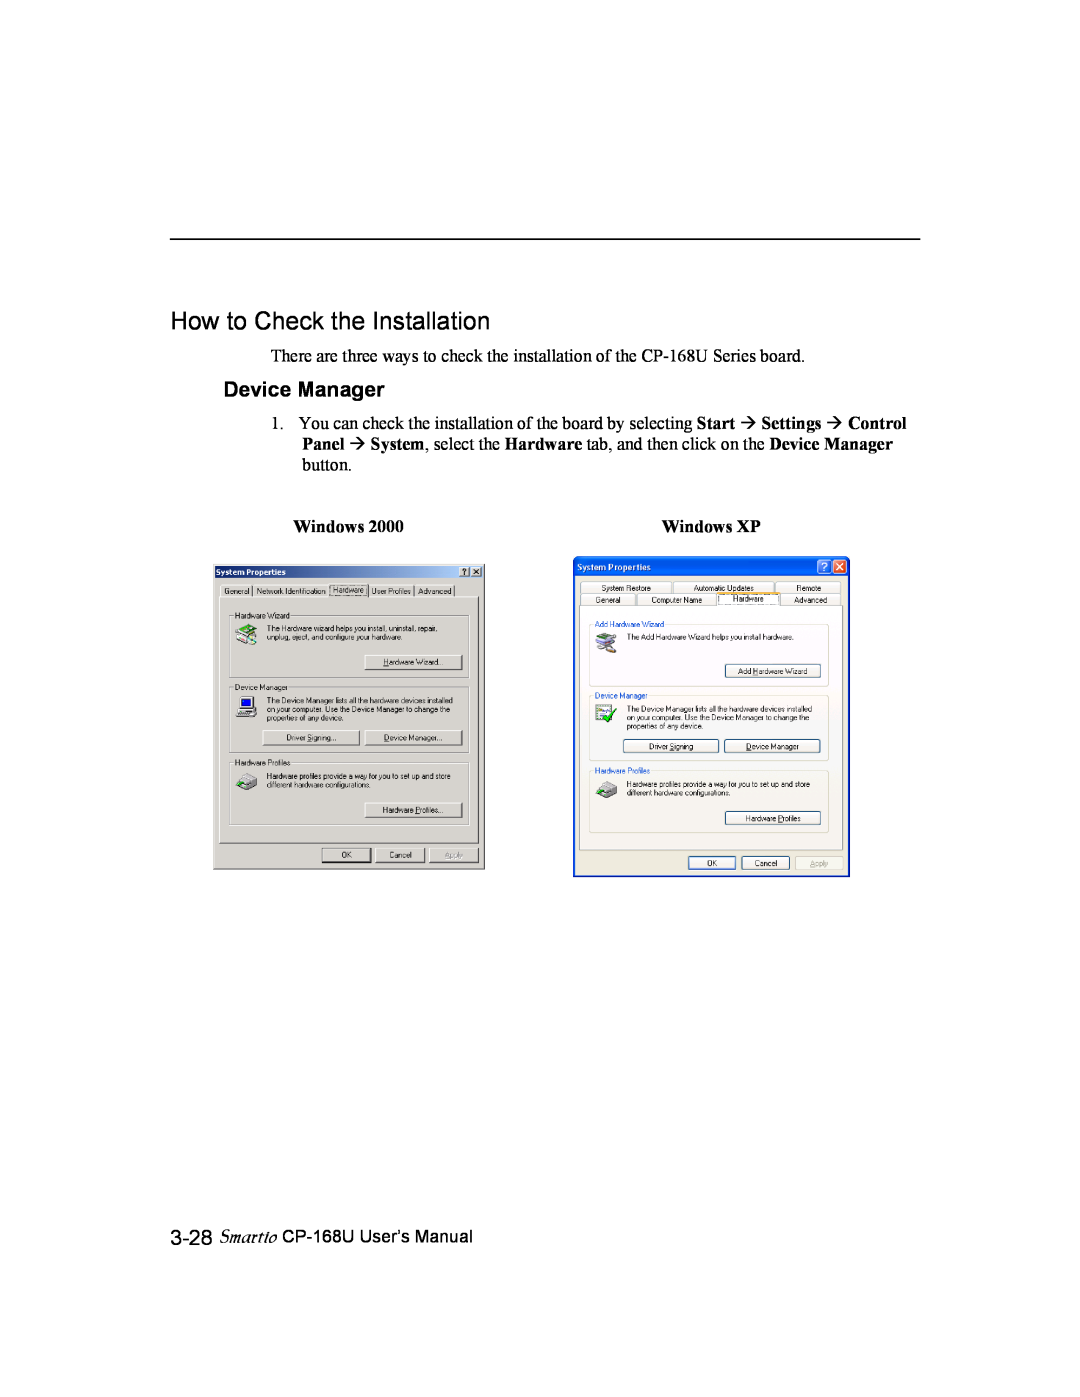 Moxa Technologies CP-168U user manual How to Check the Installation, Device Manager, Windows XP 